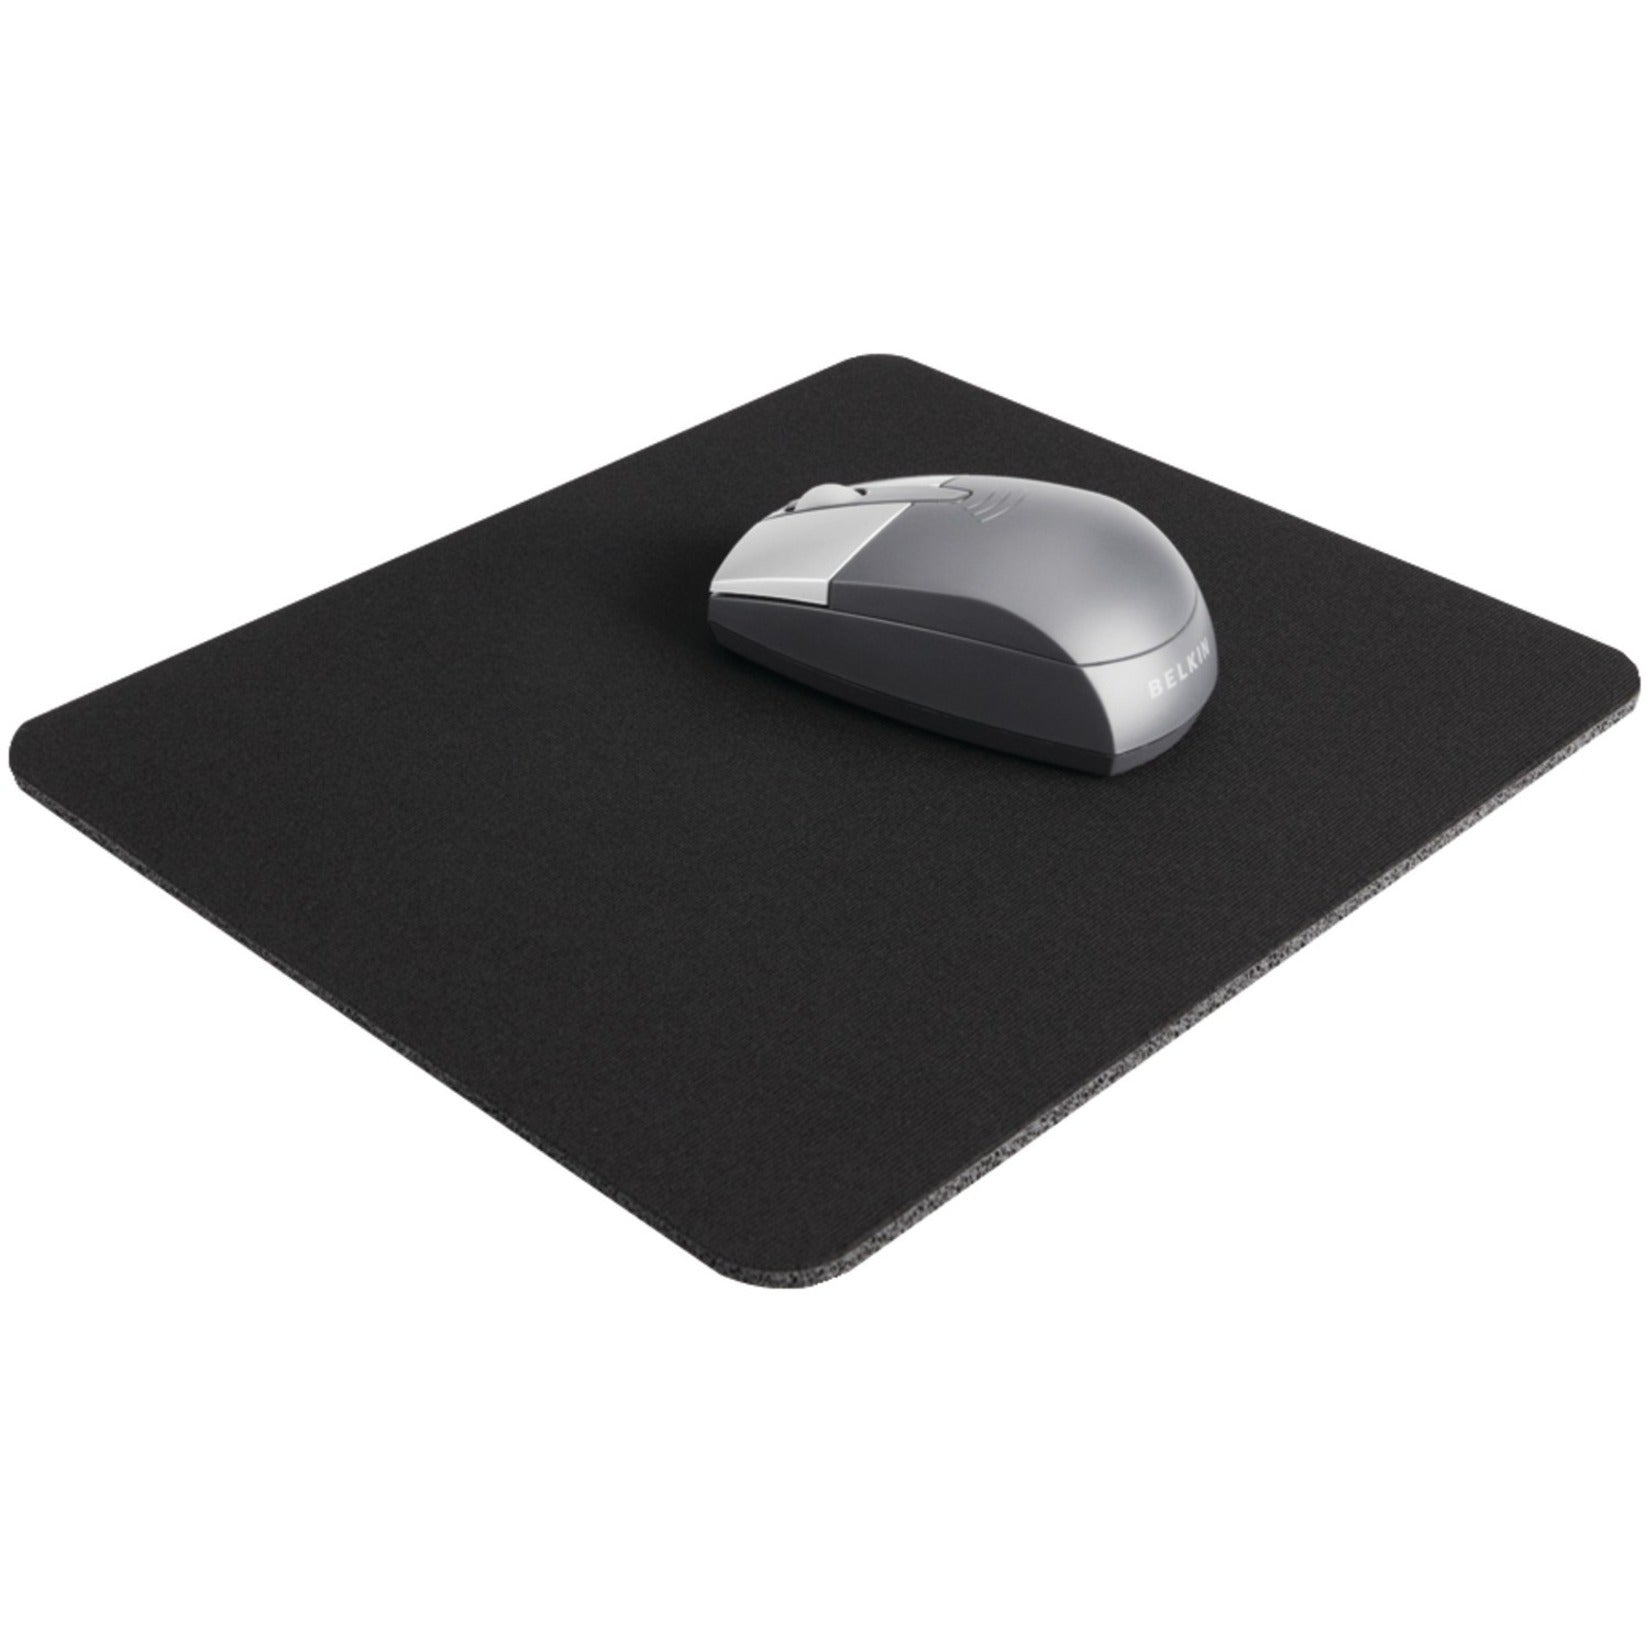 Belkin F8E089-BLK Mouse Pad - Provides Excellent Point-and-Click Accuracy, Works with Any Standard Mouse